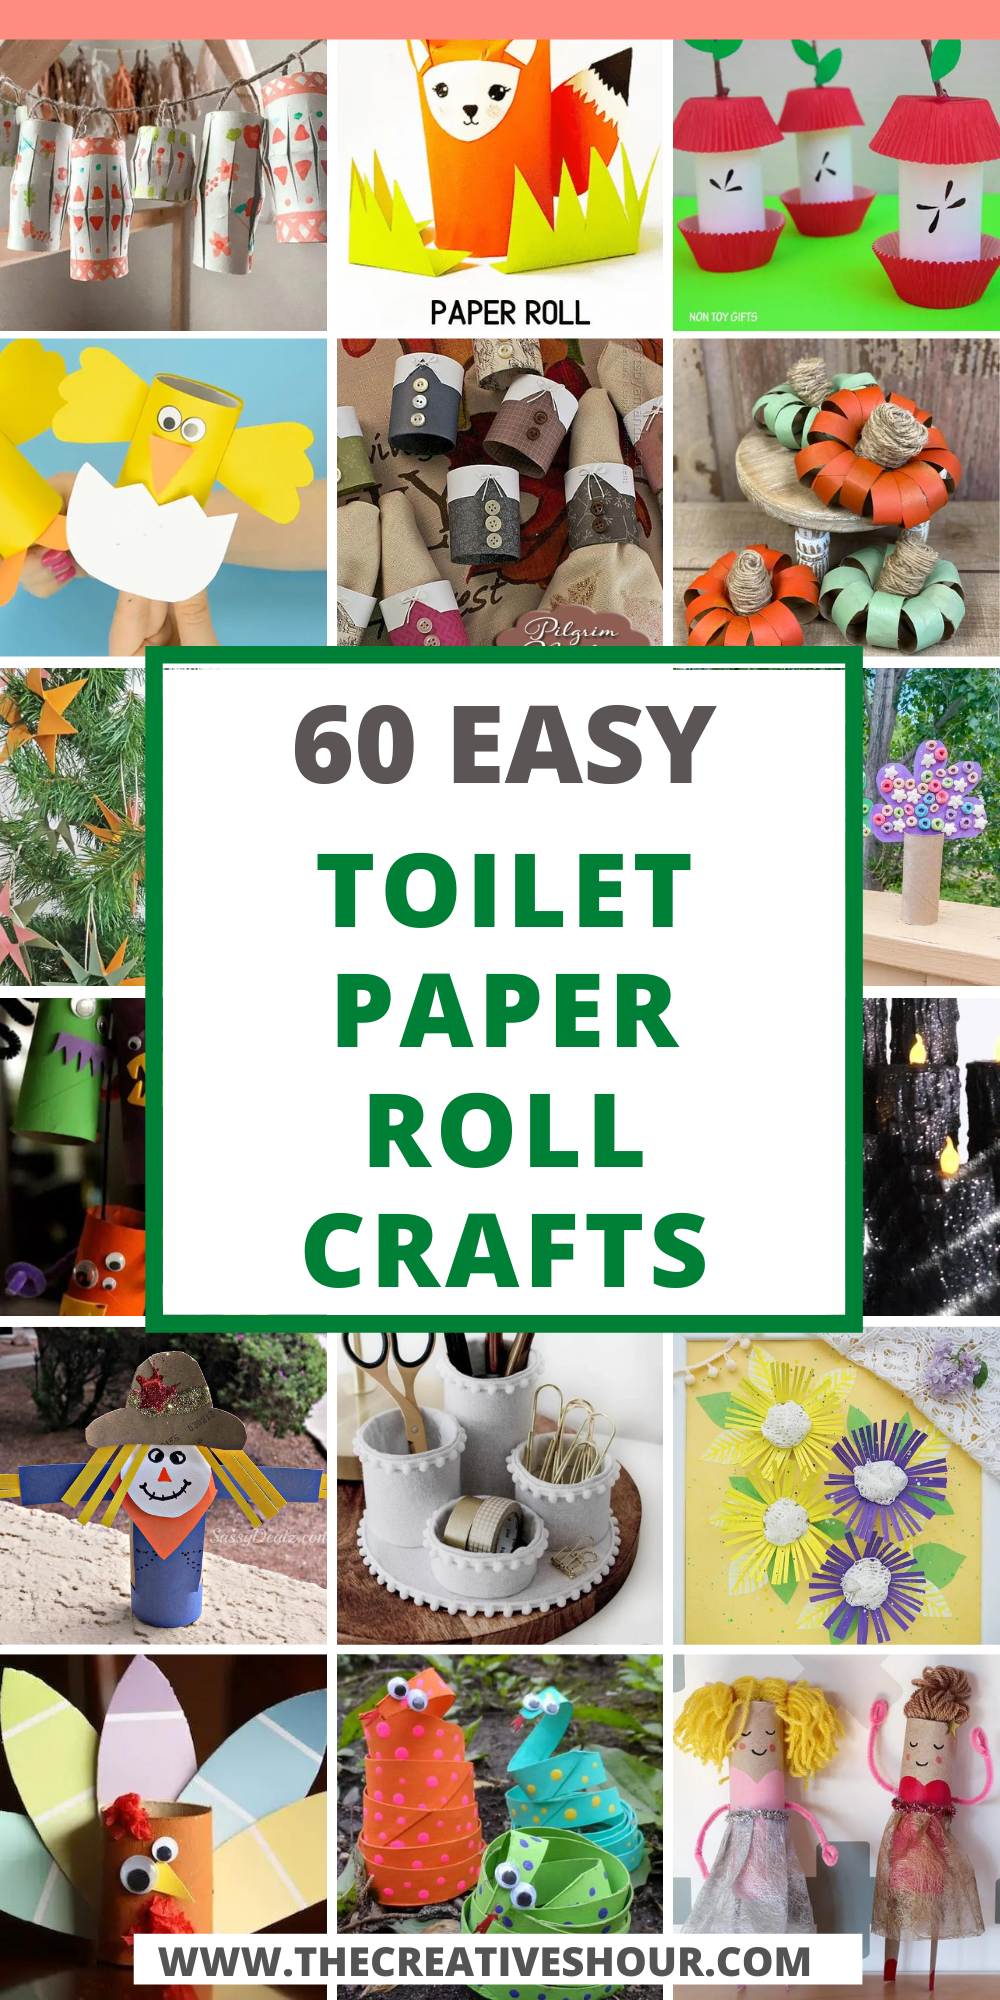 40 Easy Toilet Paper Roll Crafts for Kids and Adults - Fabulessly Frugal